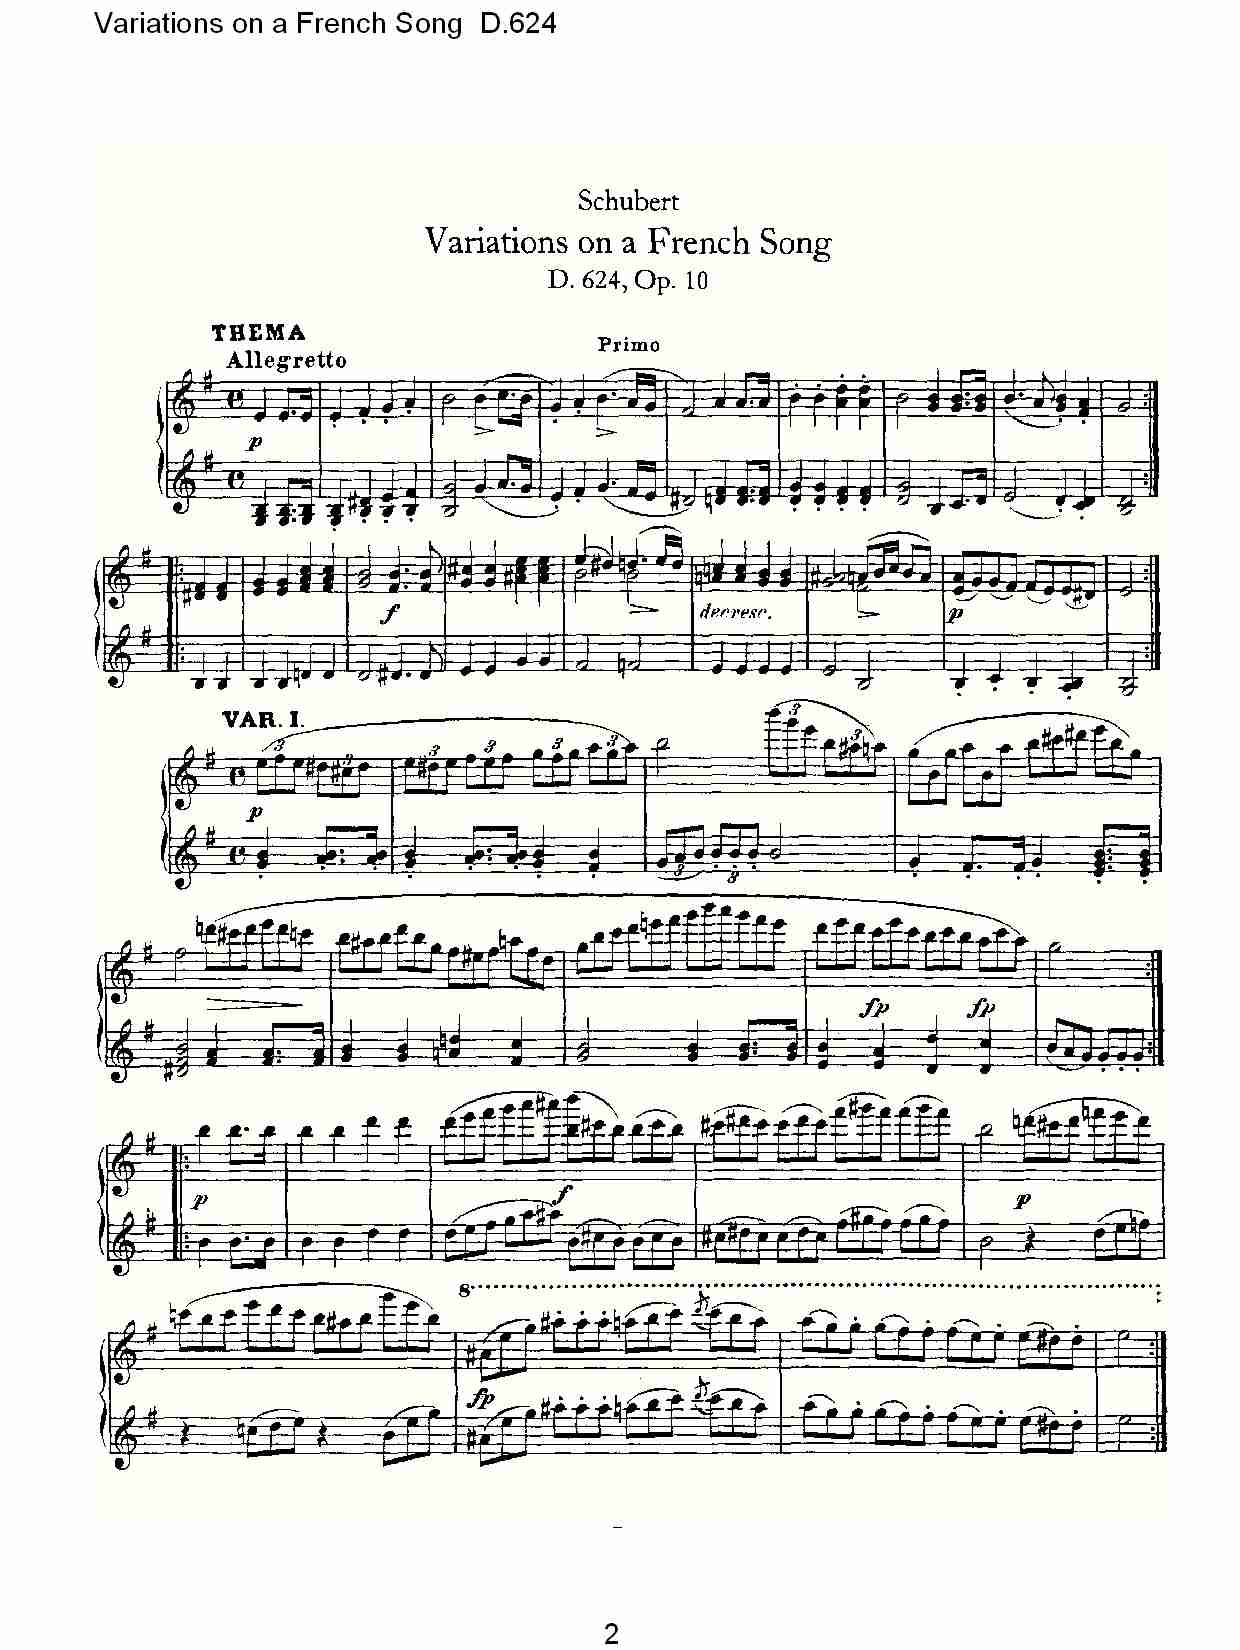 Variations on a French Song D.624  法国歌曲变鸣曲D.624（一）总谱（图2）